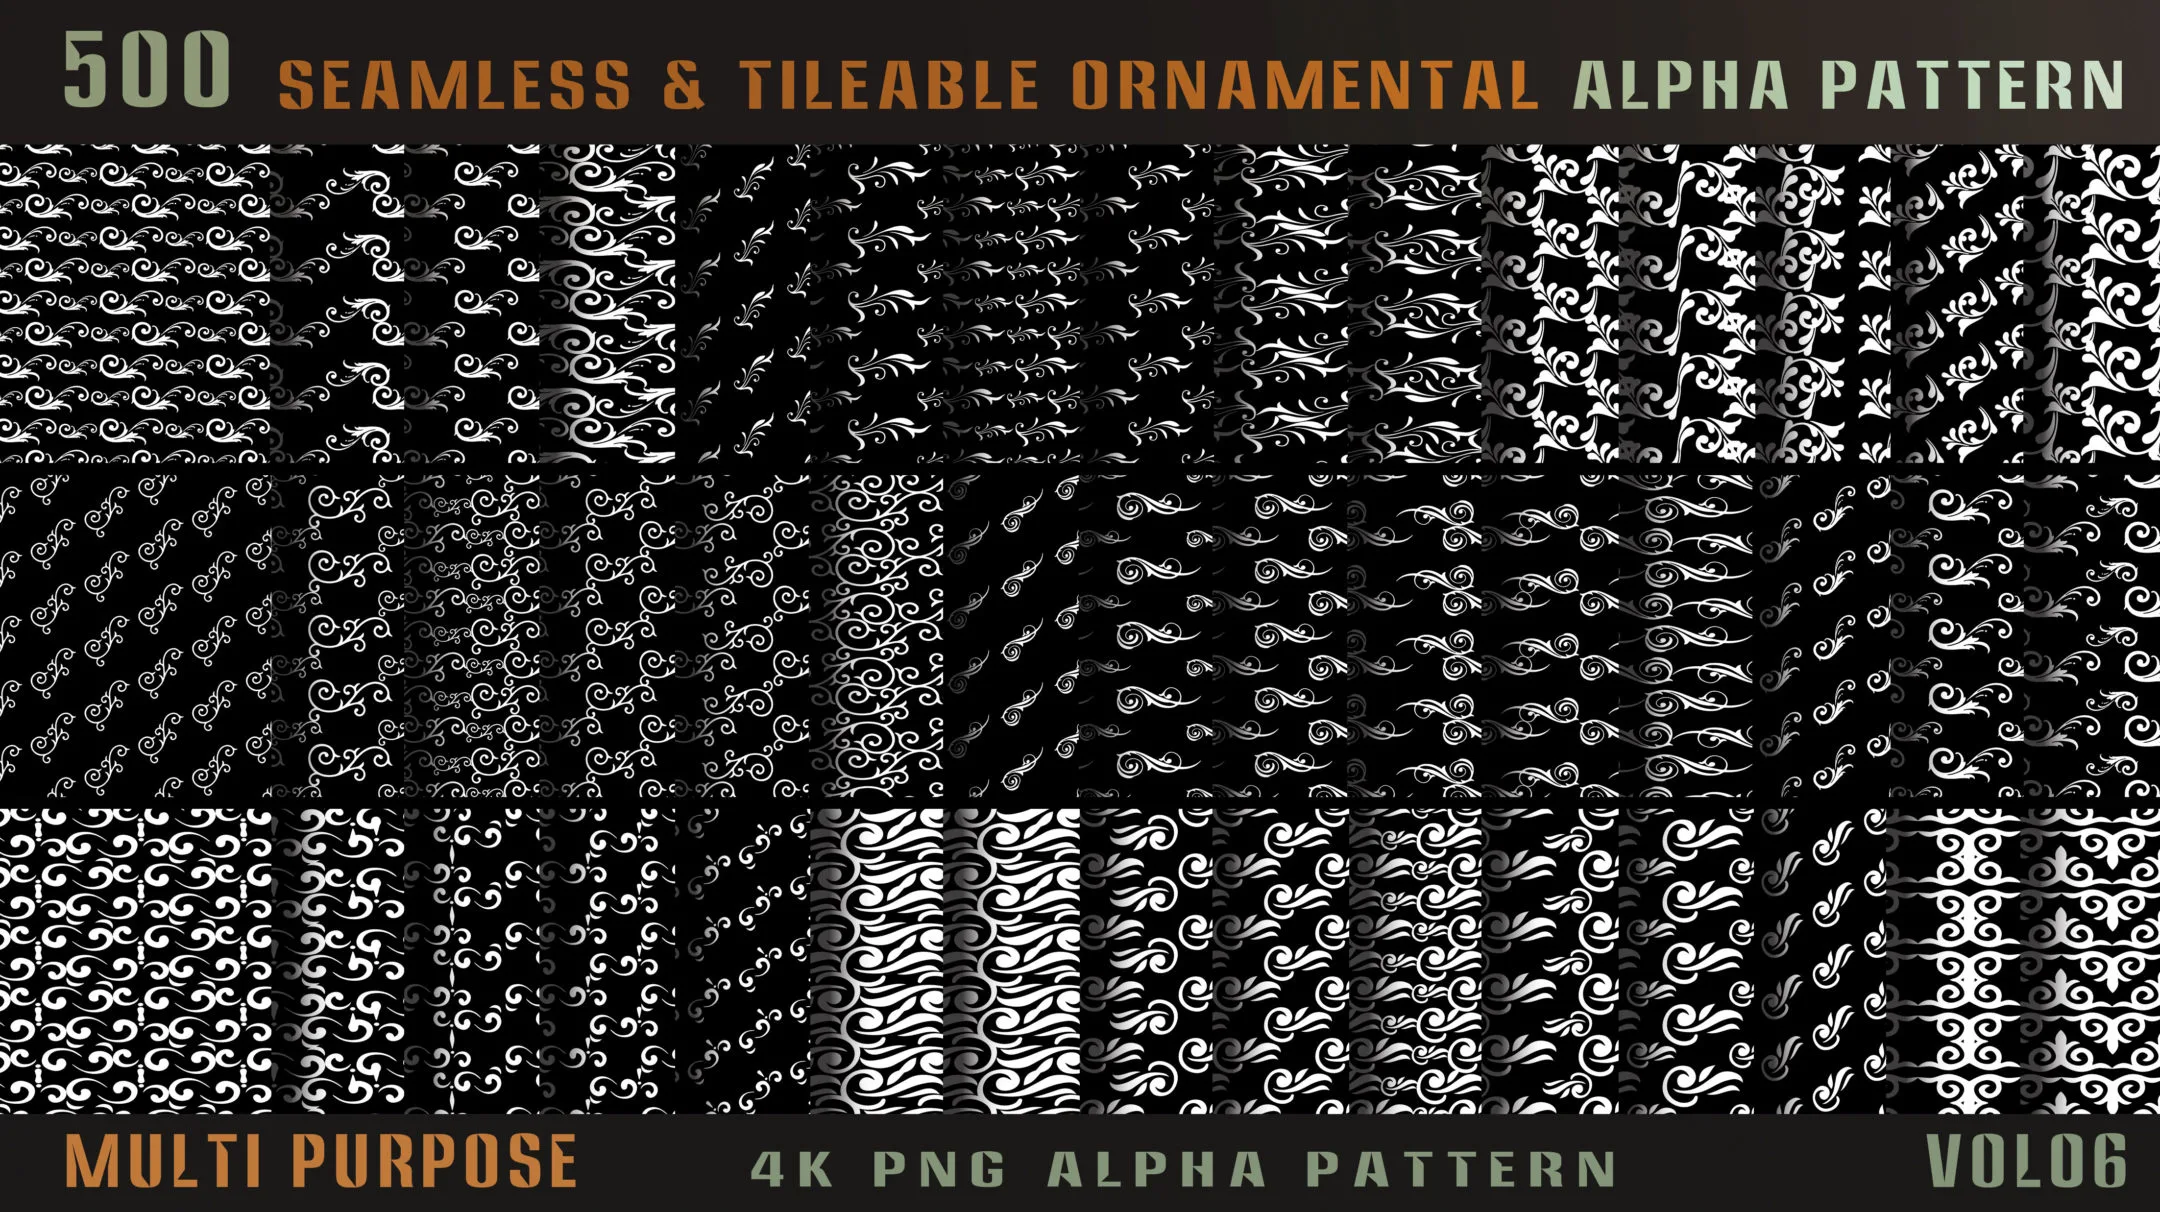 500 seamless and tileable ornamental alpha pattern-Vol06